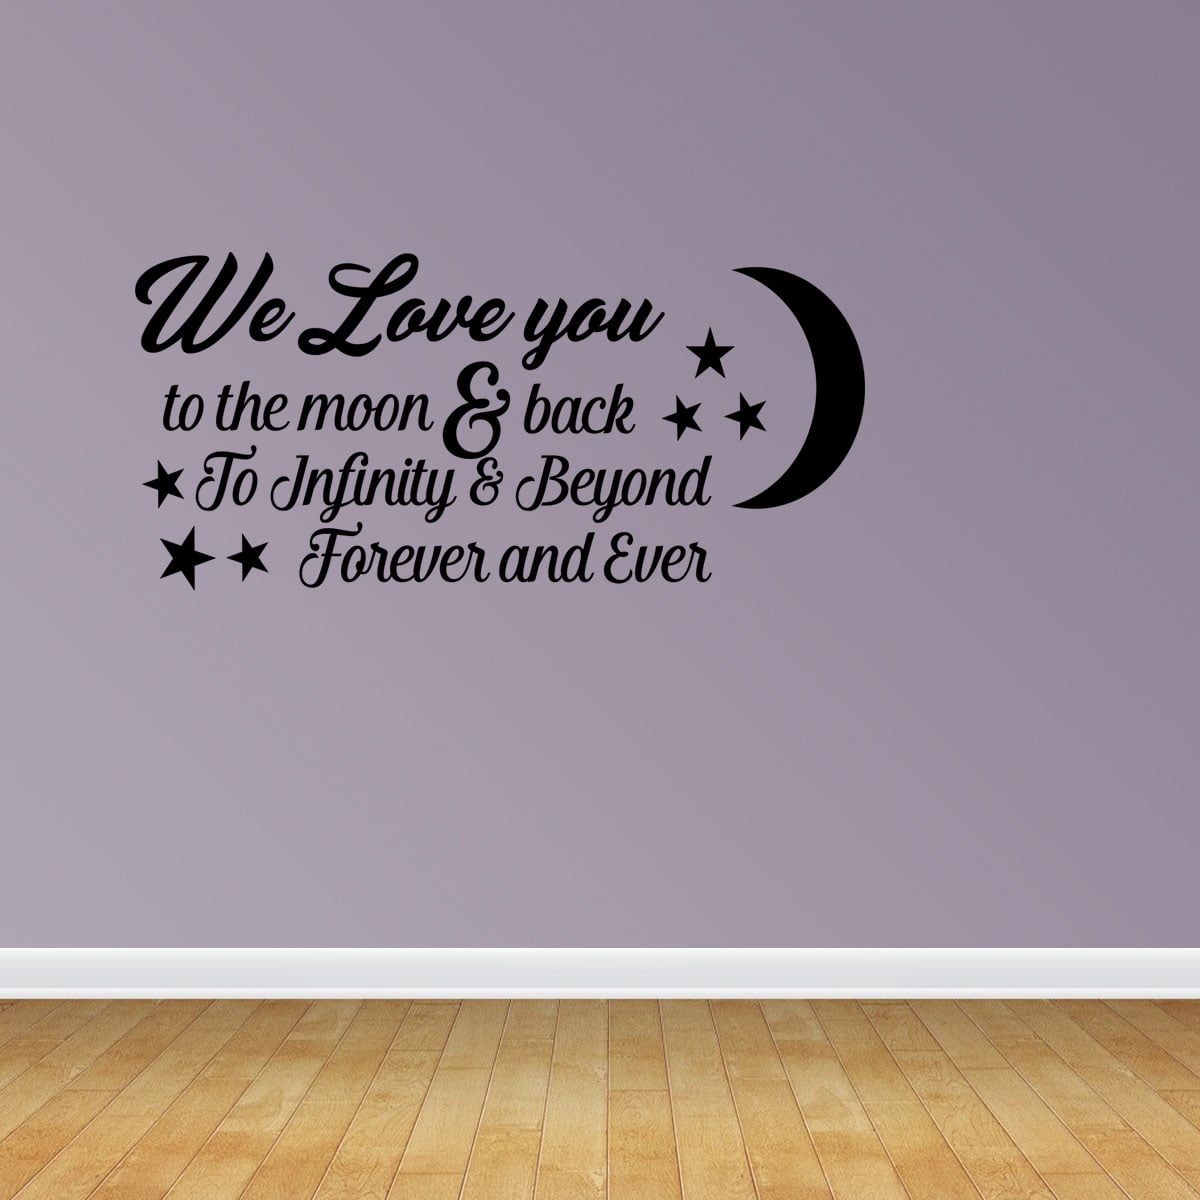 I Love You to the Moon and Back Quote Car Window Tumblers Wall Decal Sticker Vinyl Laptops Cellphones Phones Tablets Ipads Helmets Motorcycles Computer Towers V and T Gifts